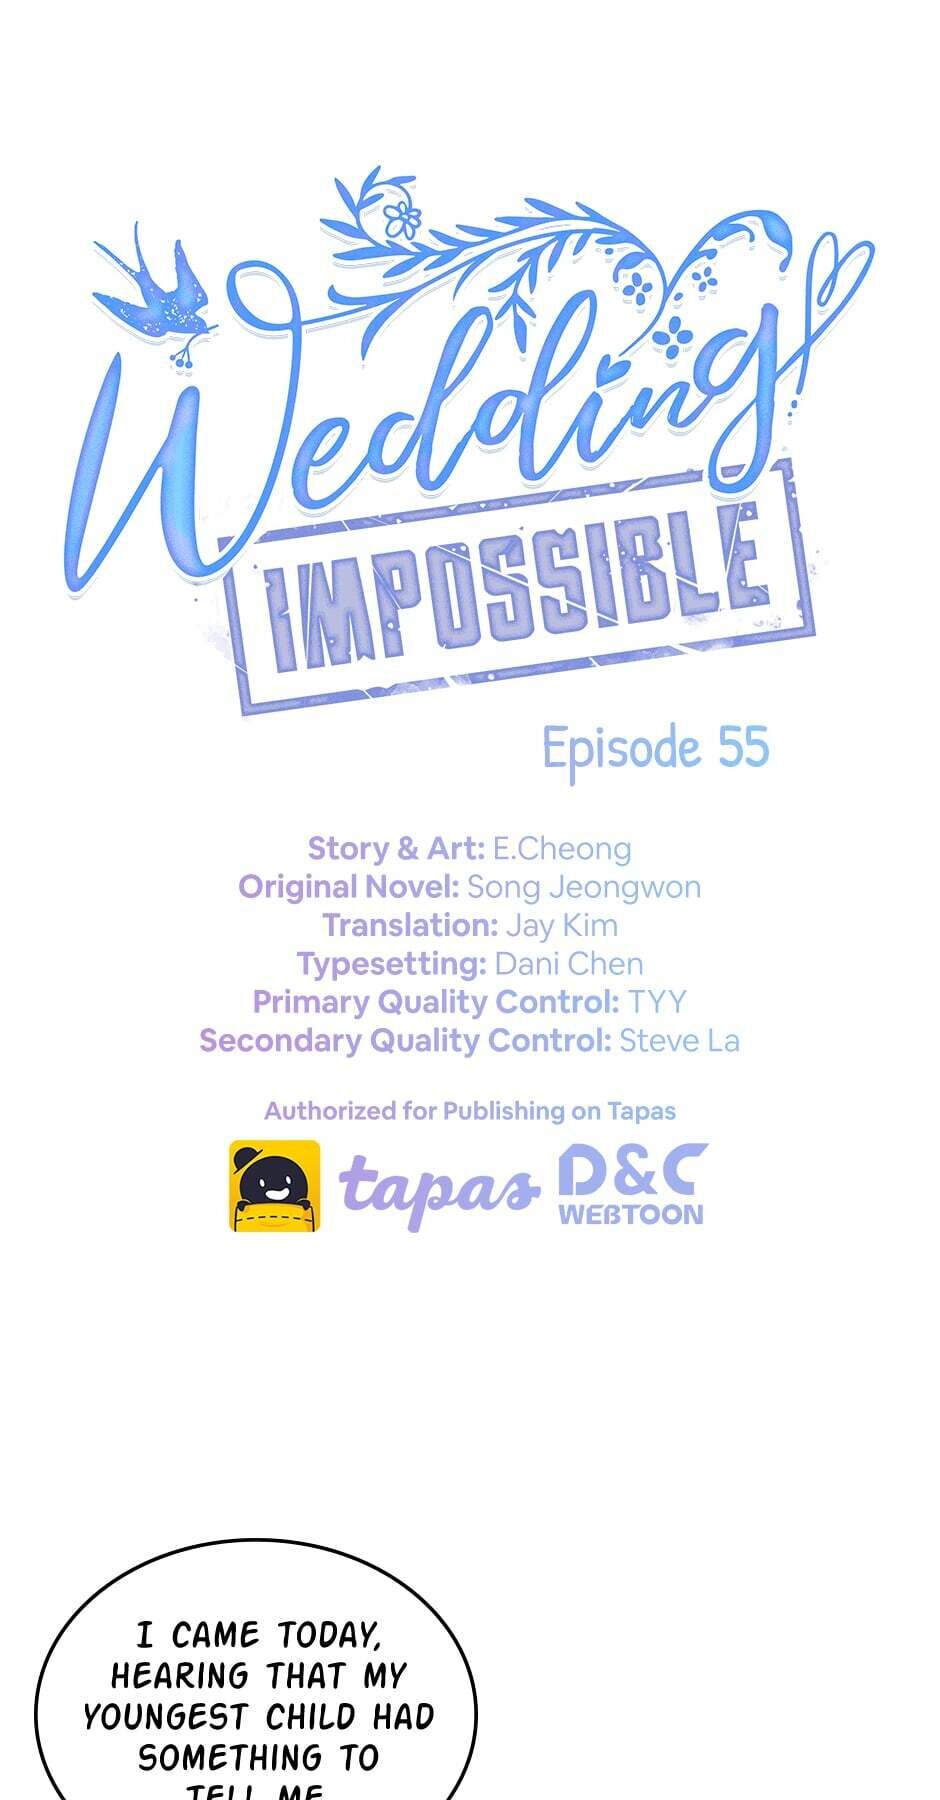 Wedding Impossible Chapter 55 - Picture 1